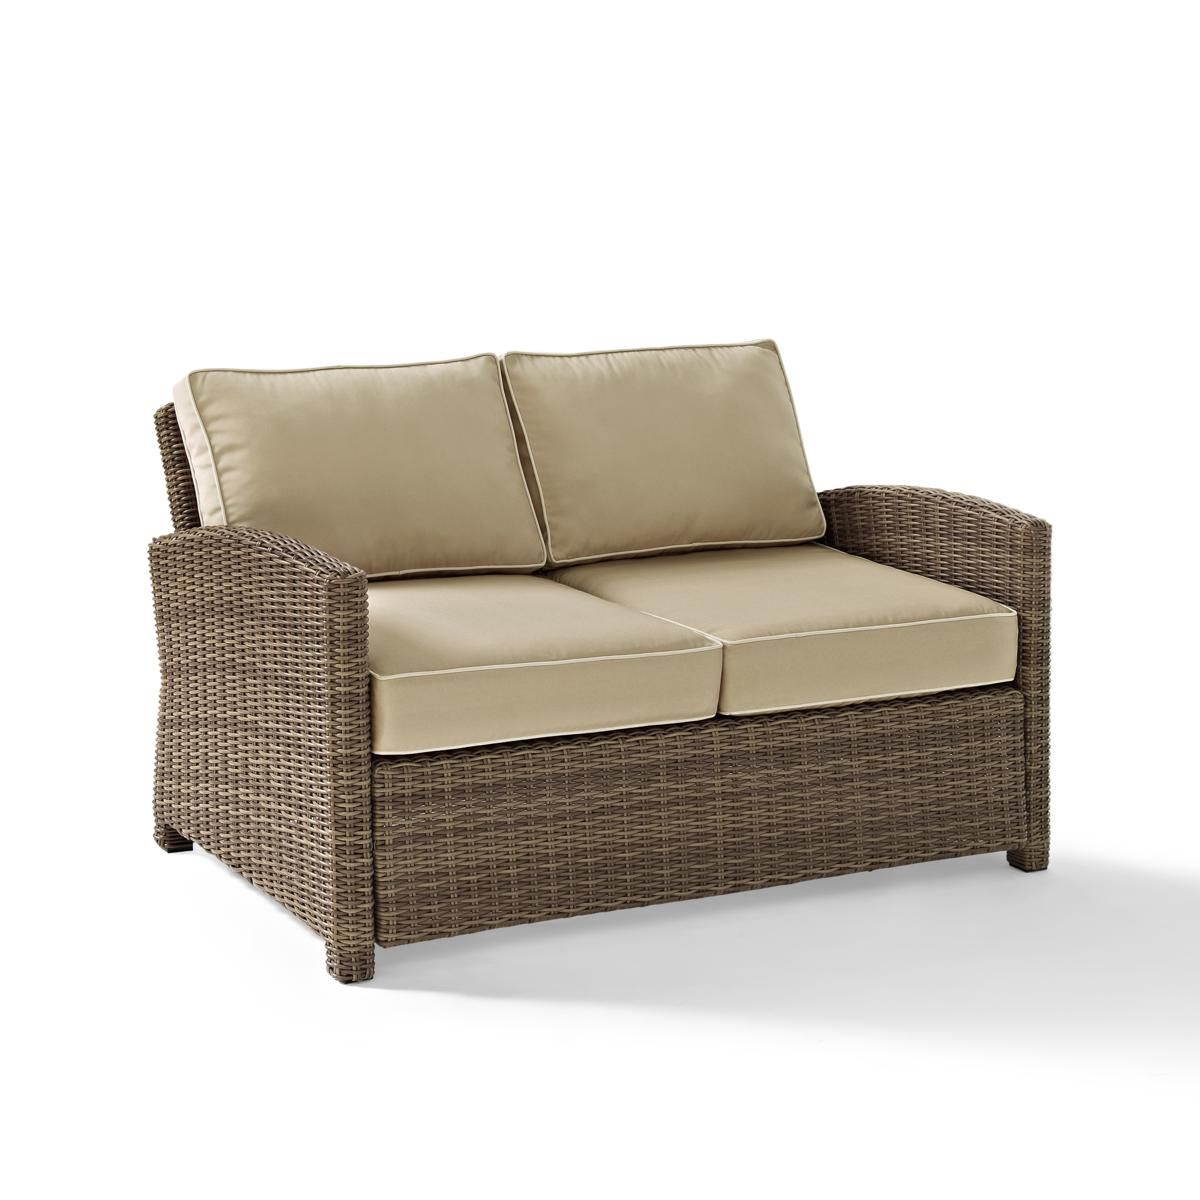 Crosley Bradenton Outdoor Wicker Loveseat With Sand Cushions | Hsn Throughout Outdoor Sand Cushions Loveseats (View 12 of 15)